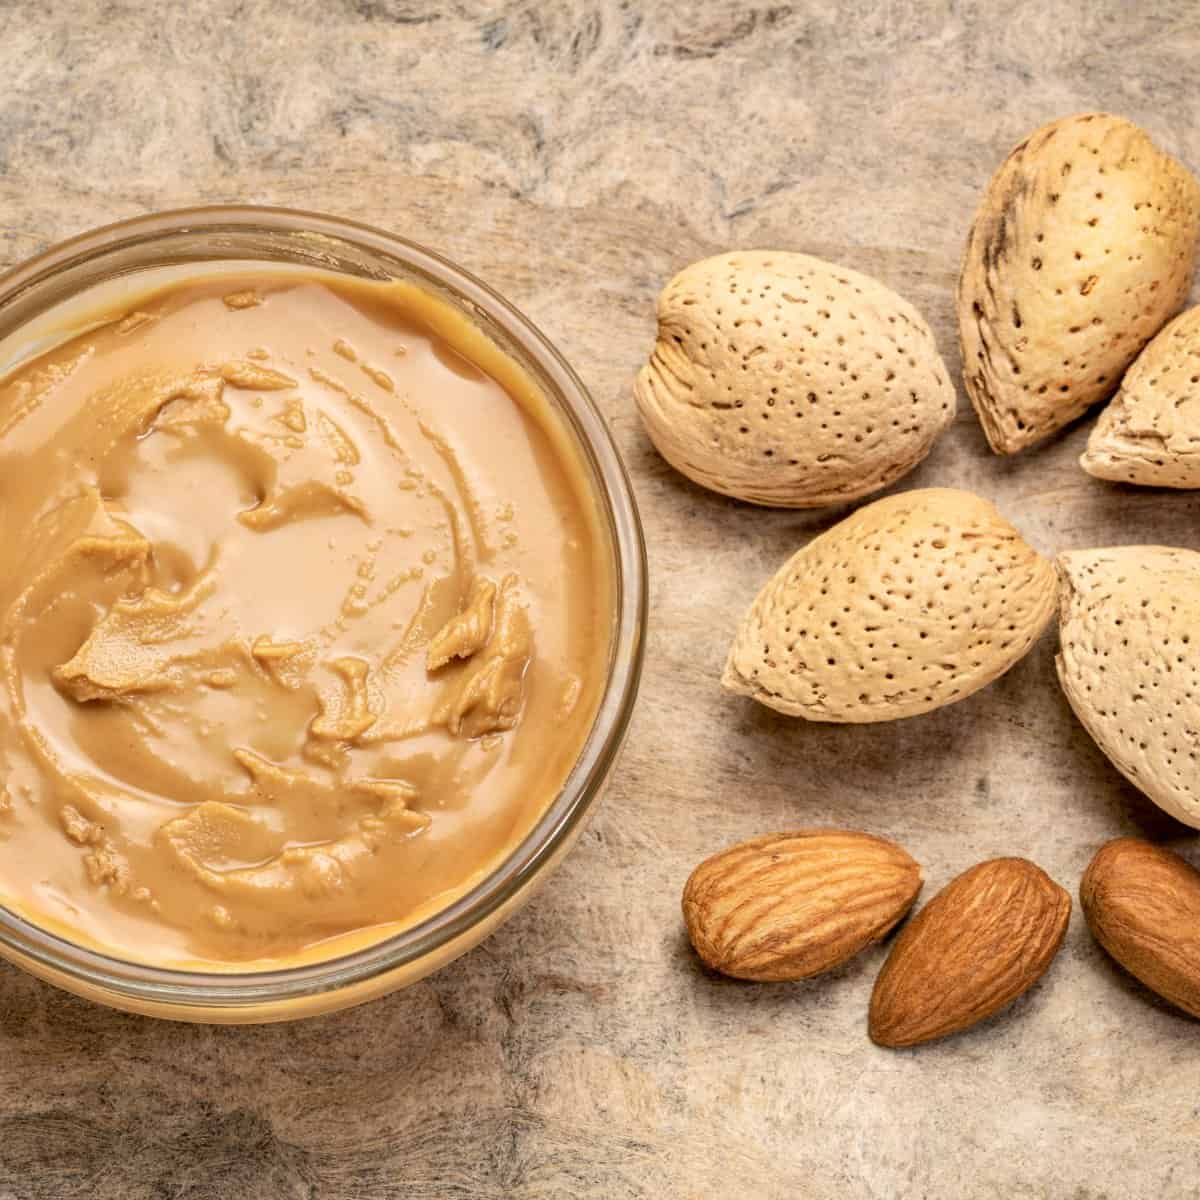 What is almond butter